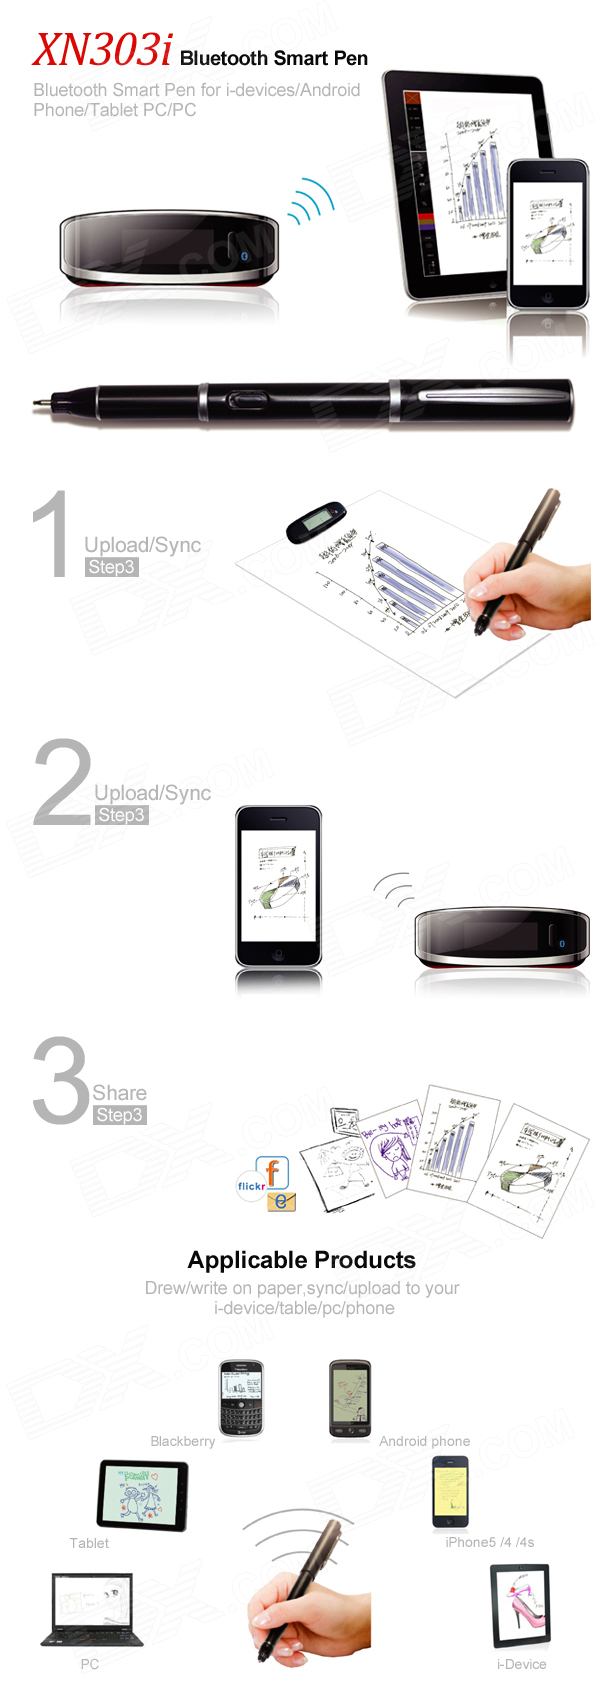  *166TL* iEFUN (apen) XN303i Bluetooth Smart Pen for iPhone / iPad / Android Phone / Tablet PC